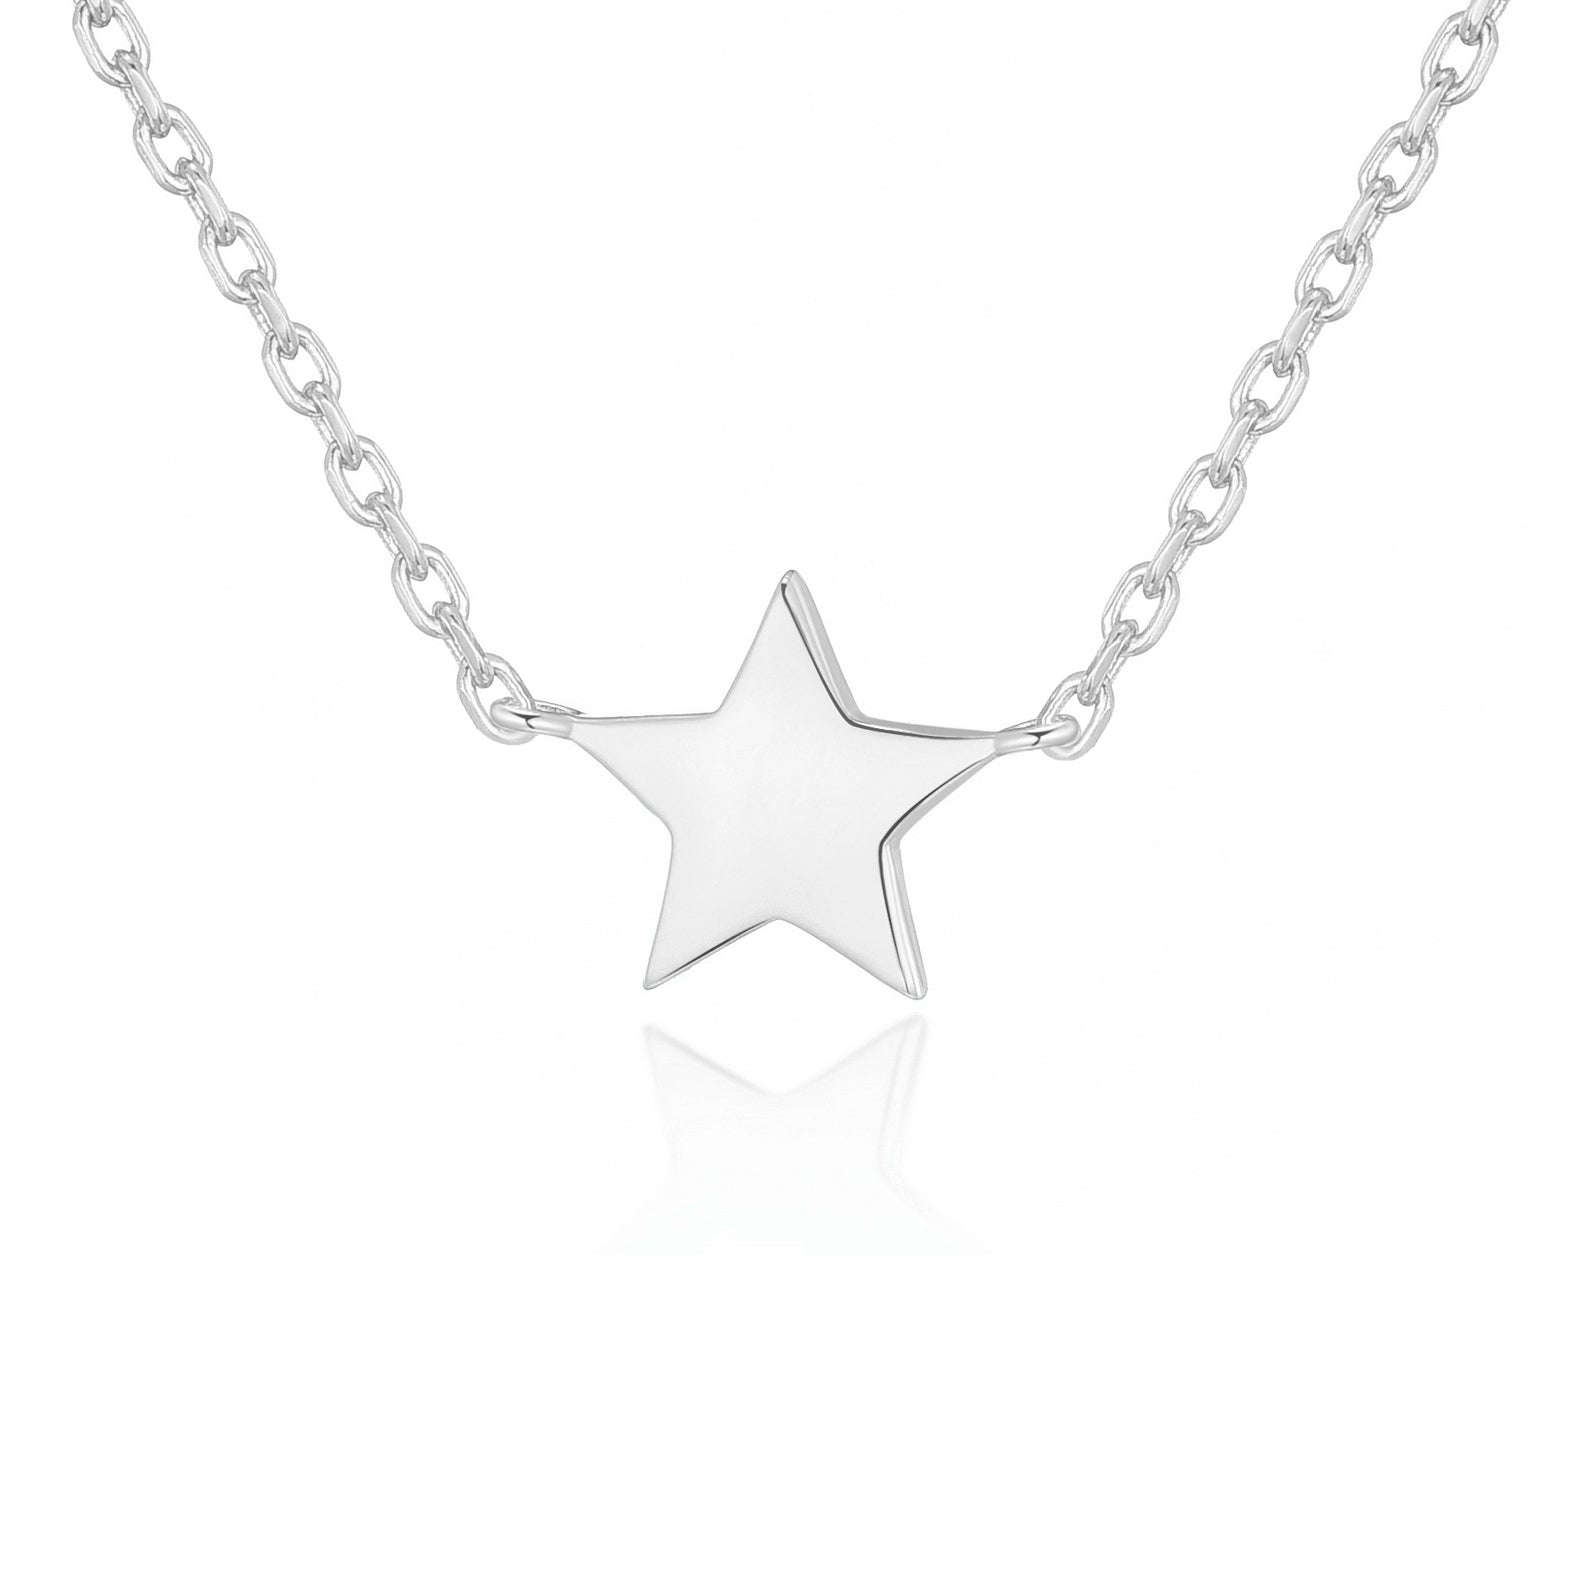 Silver Plated Star Necklace by Philip Jones Jewellery